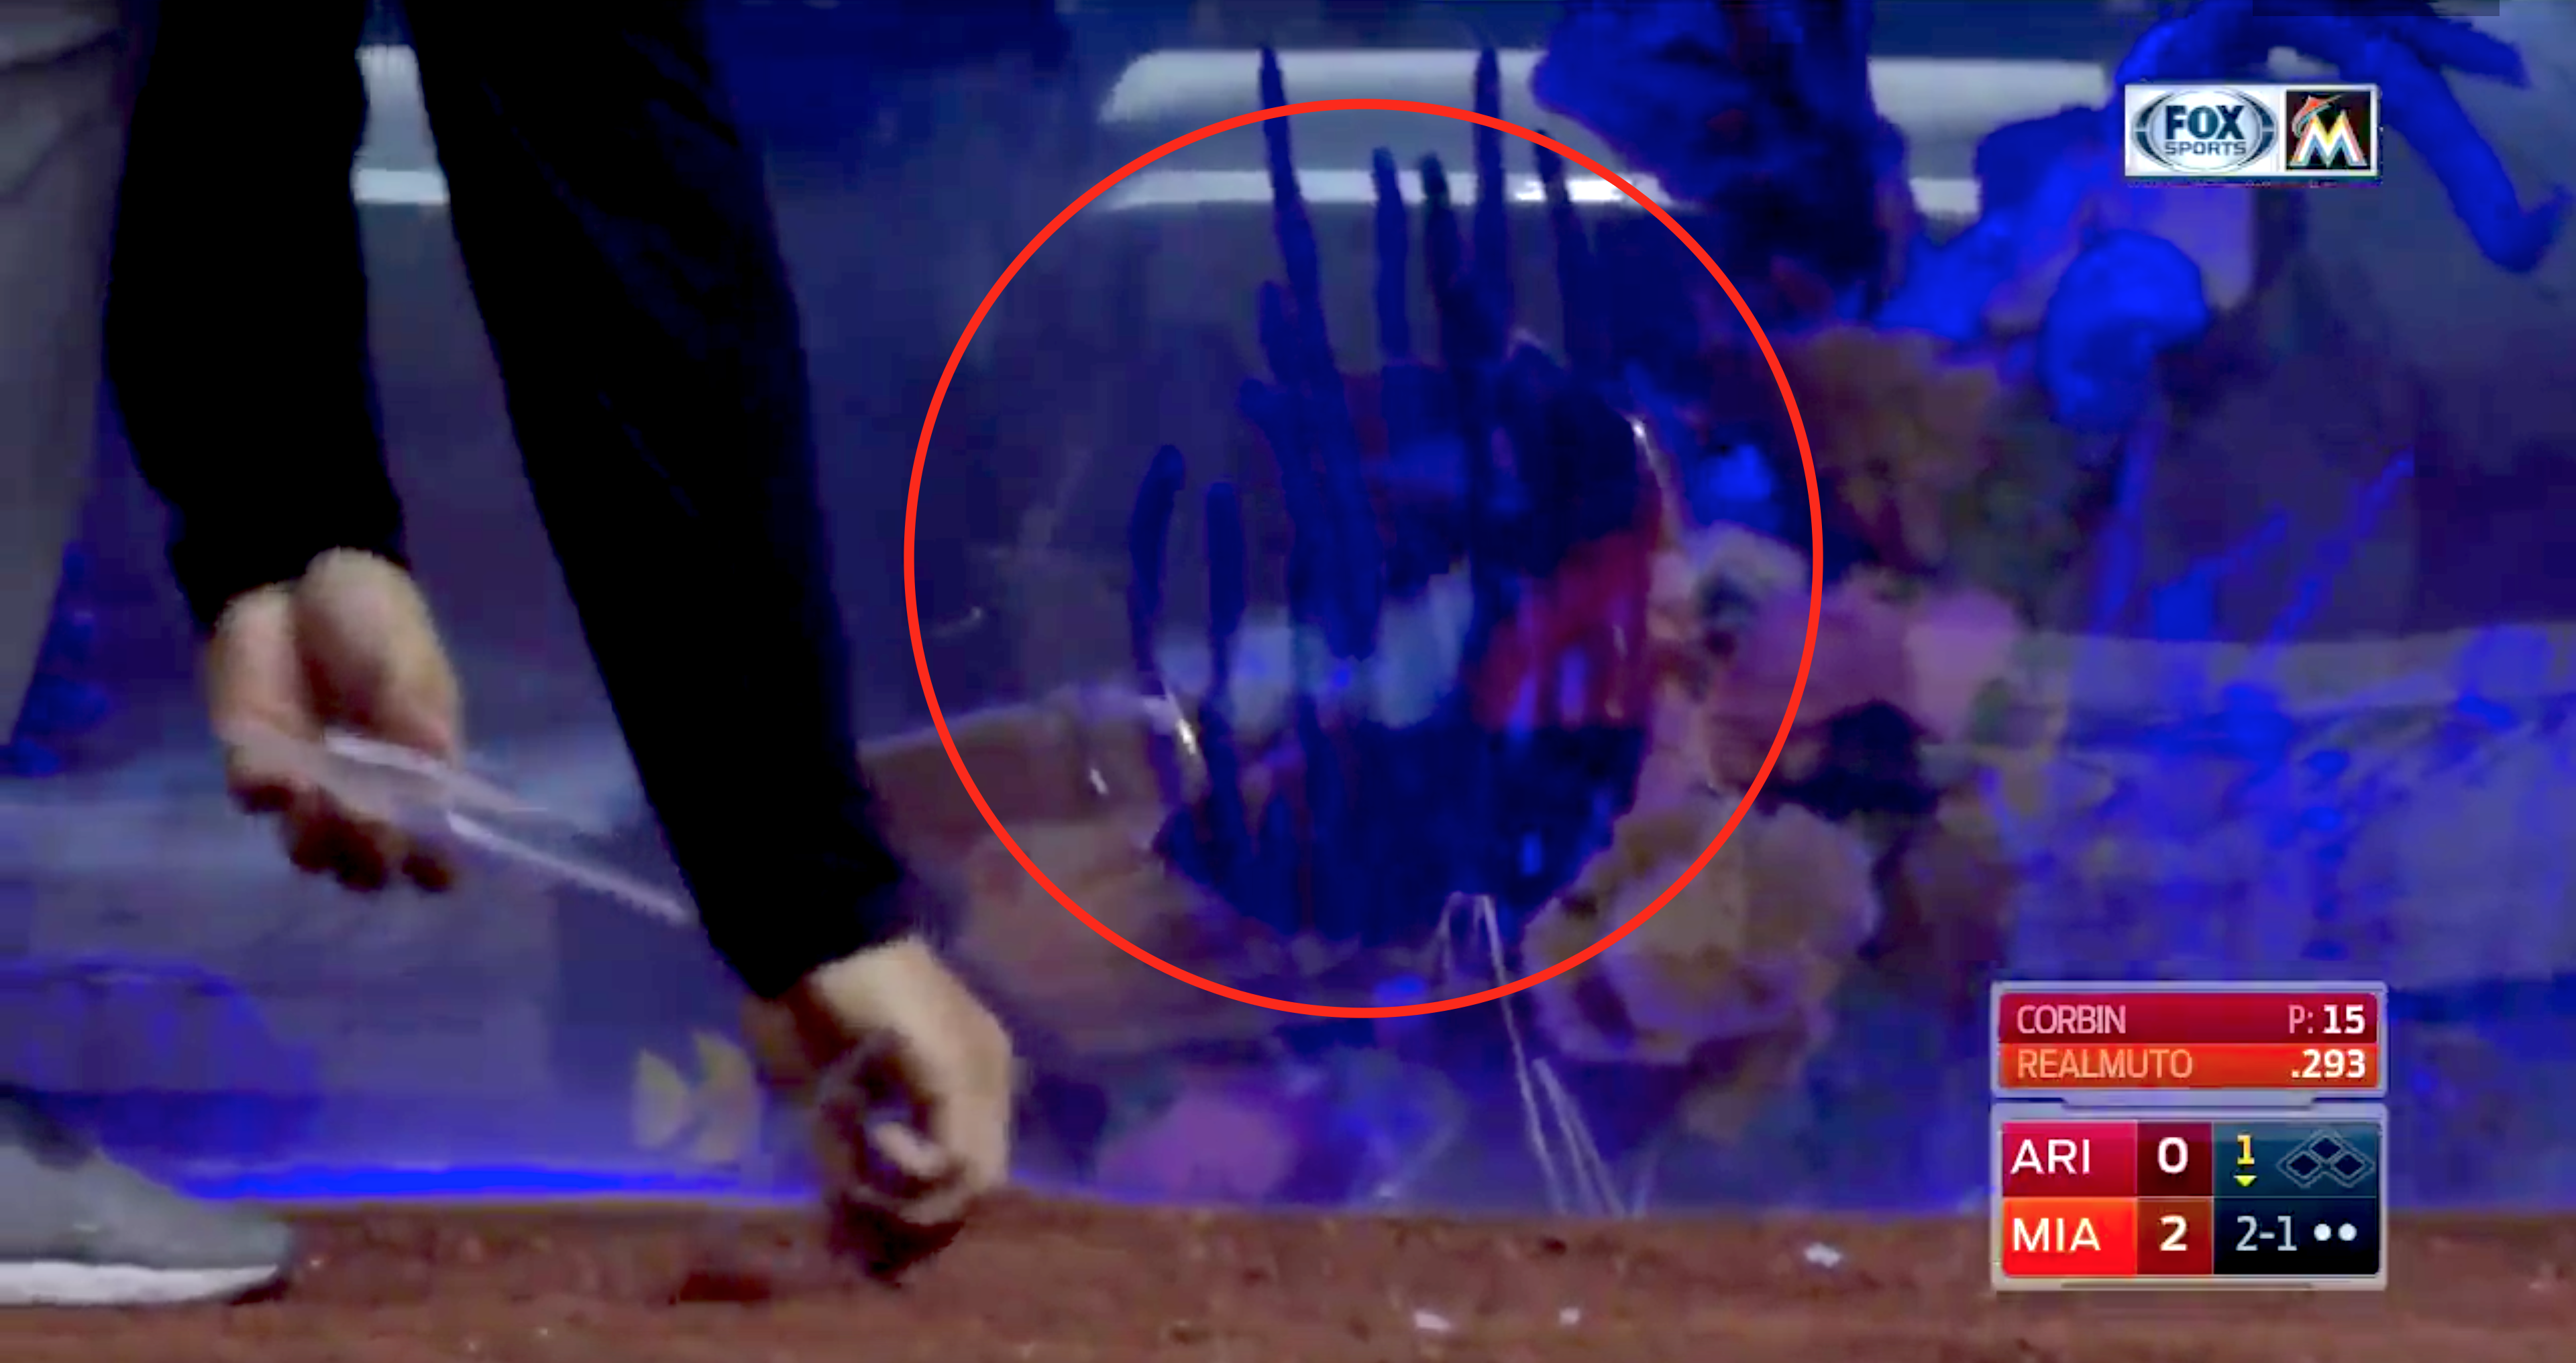 Foul Tip Cracks Marlins Home Plate Fish Tank, Which Exists Because Why?